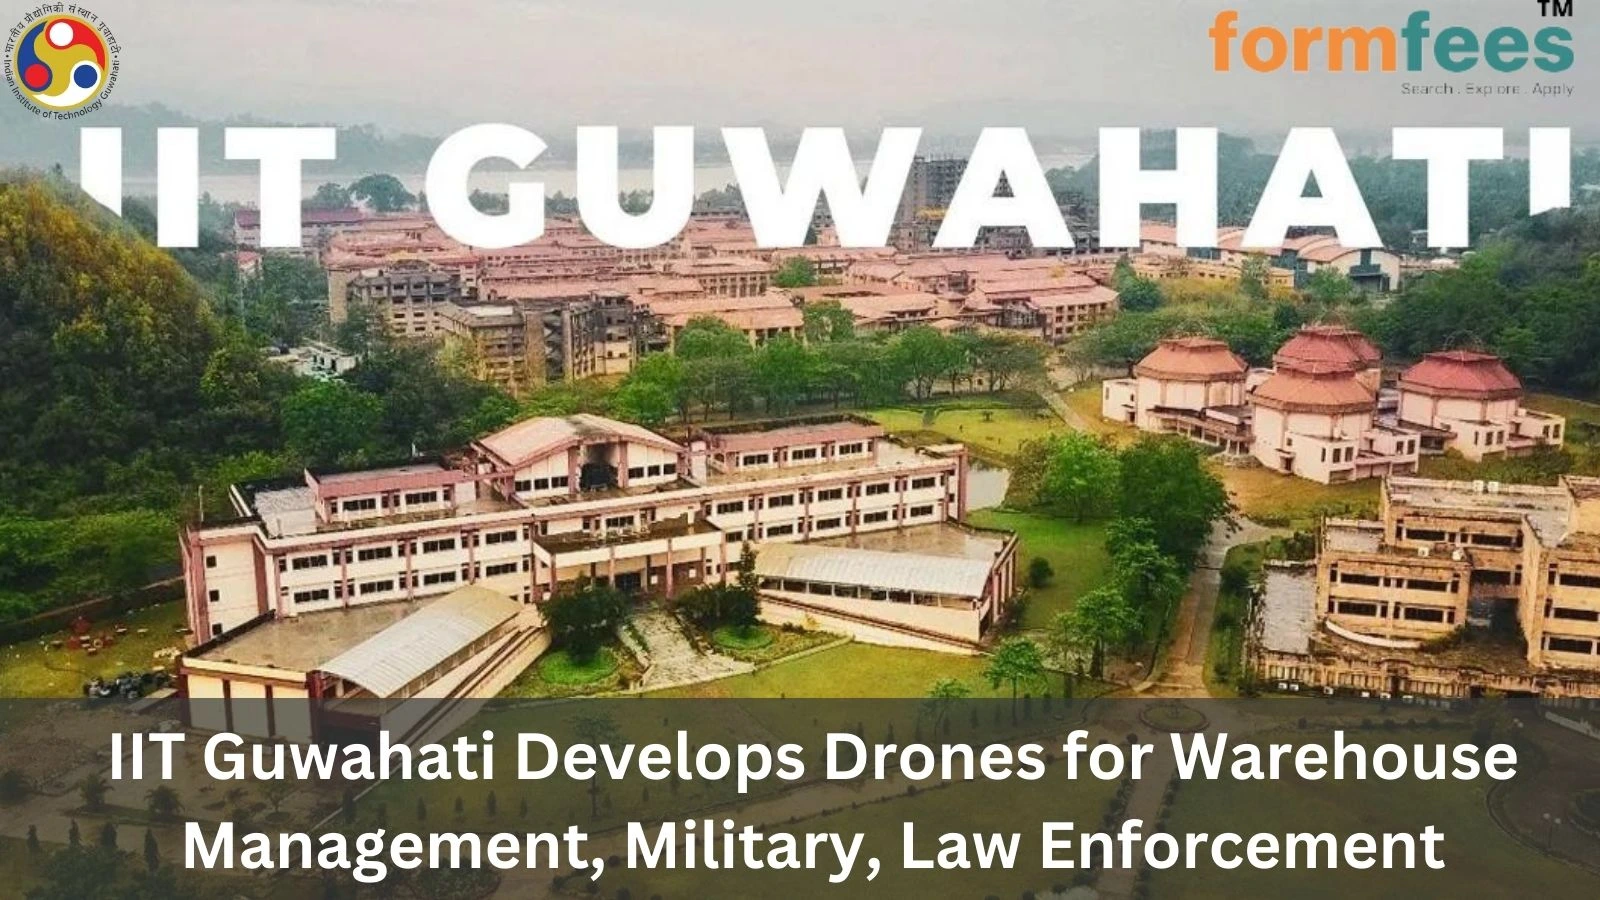 IIT Guwahati Develops Drones for Warehouse Management, Military, Law Enforcement